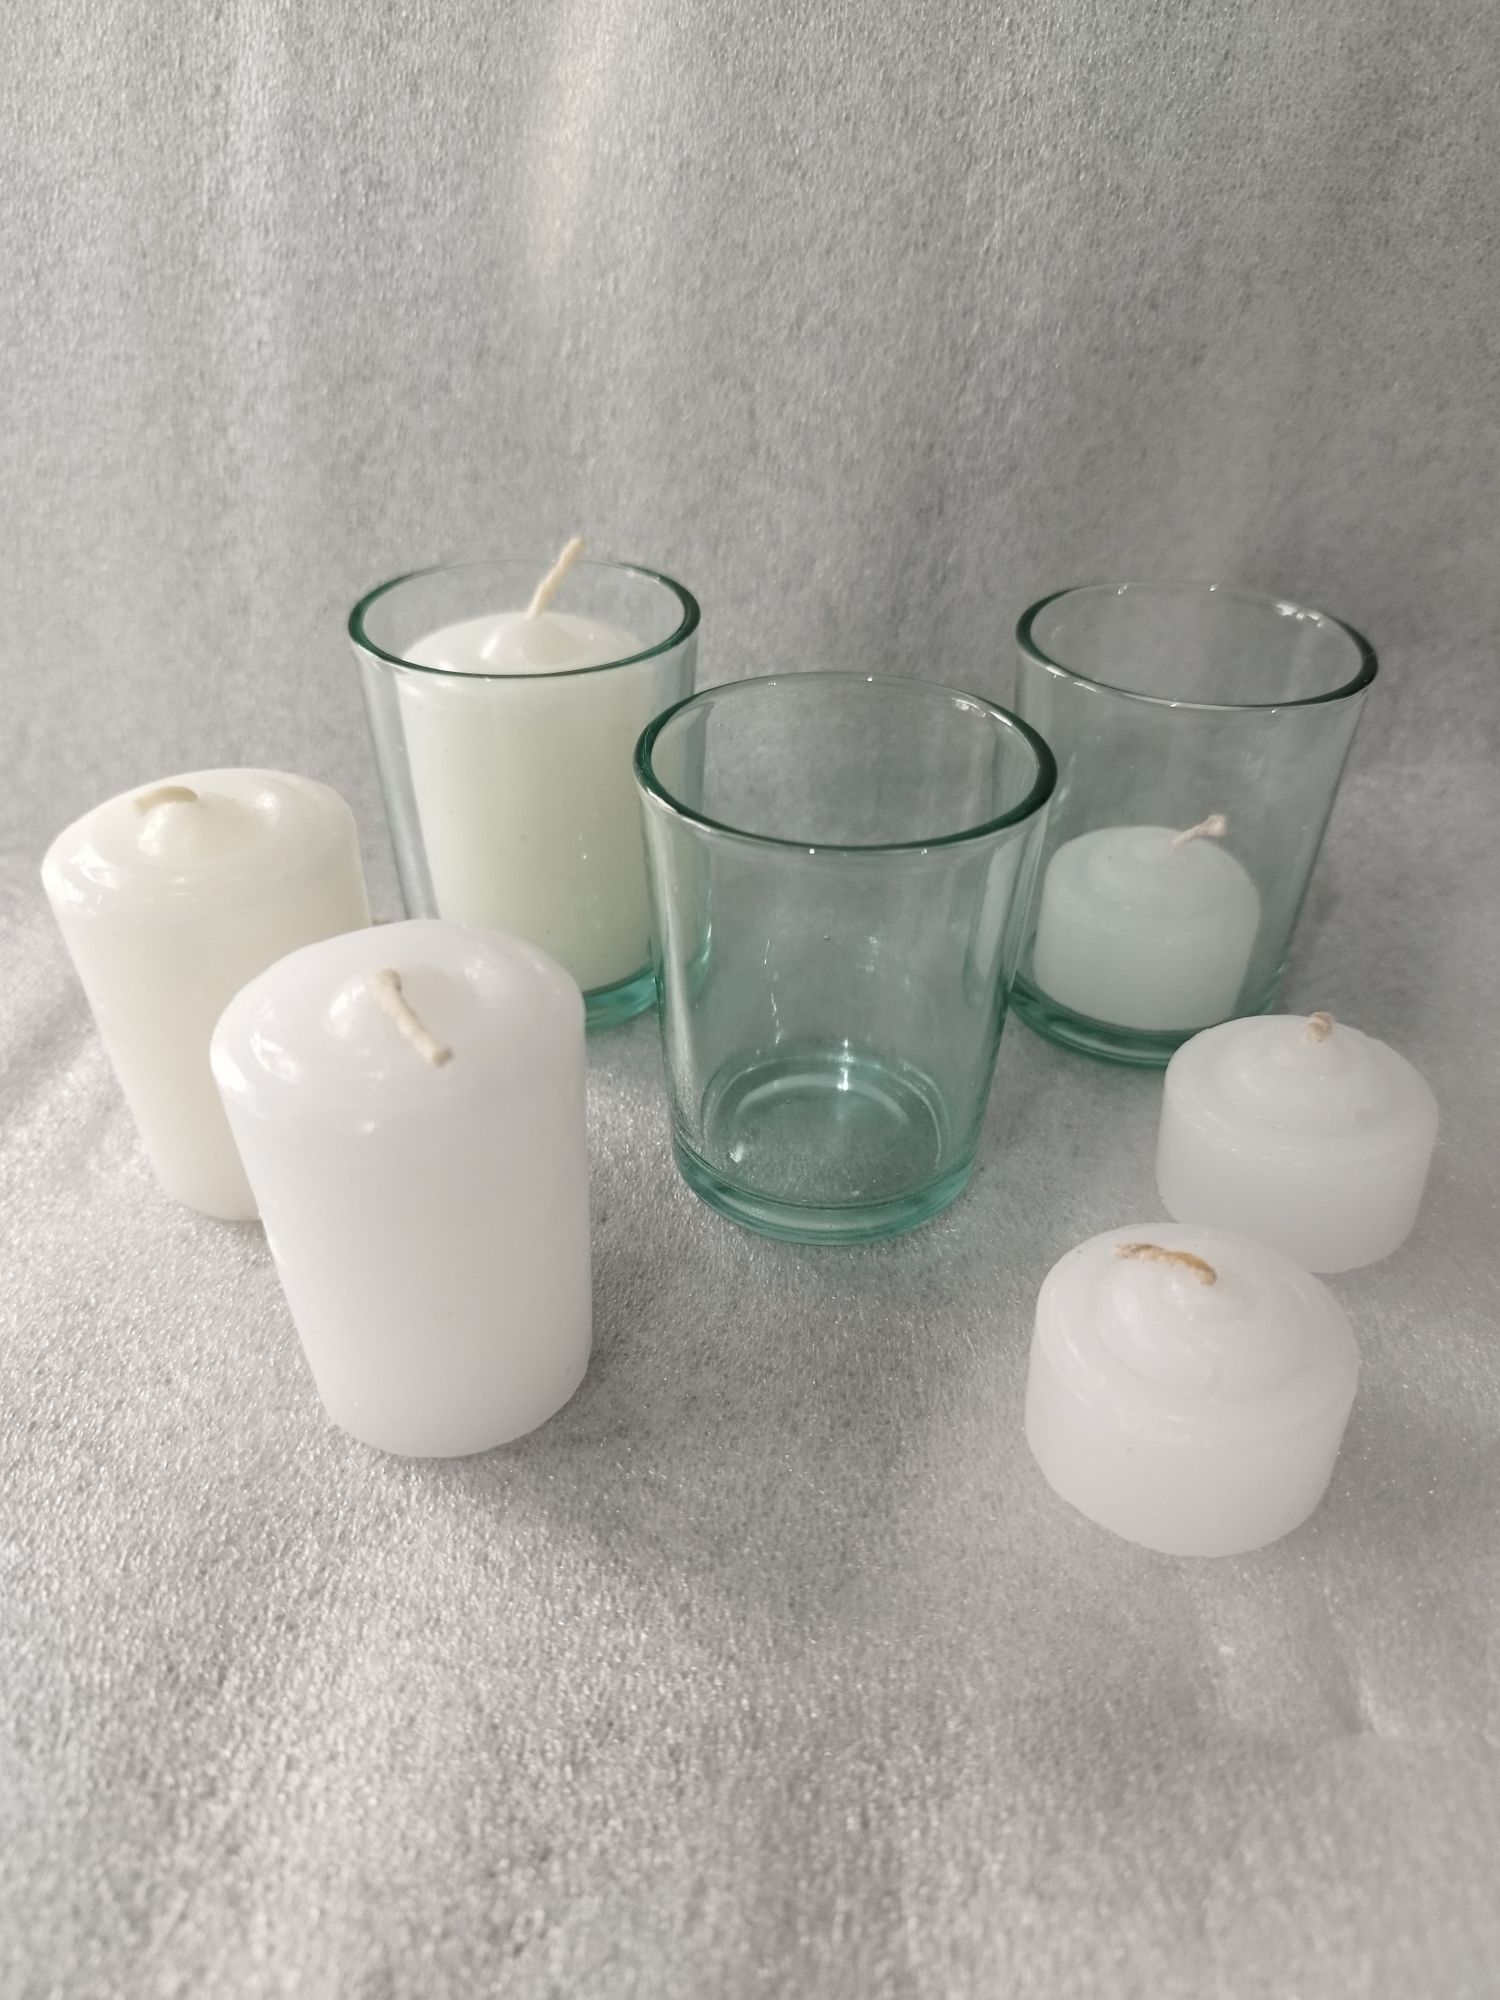 HOMEMAXS 6pcs Candle Holders Iron Candle Cups Candle Containers